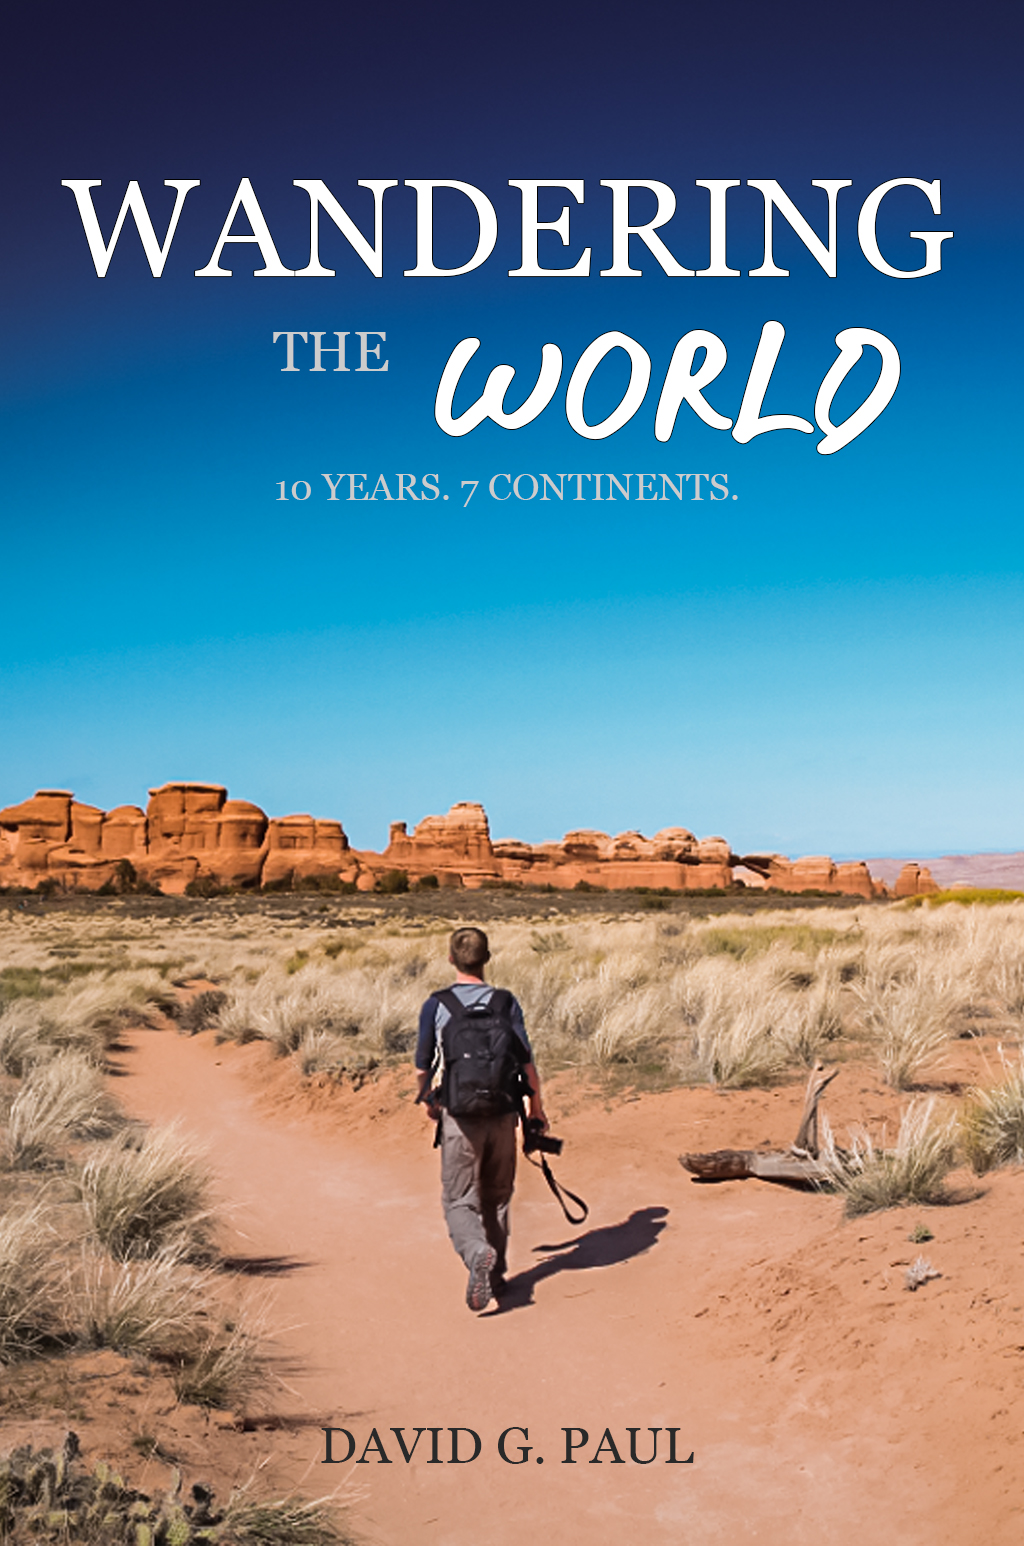 Wandering the World book cover